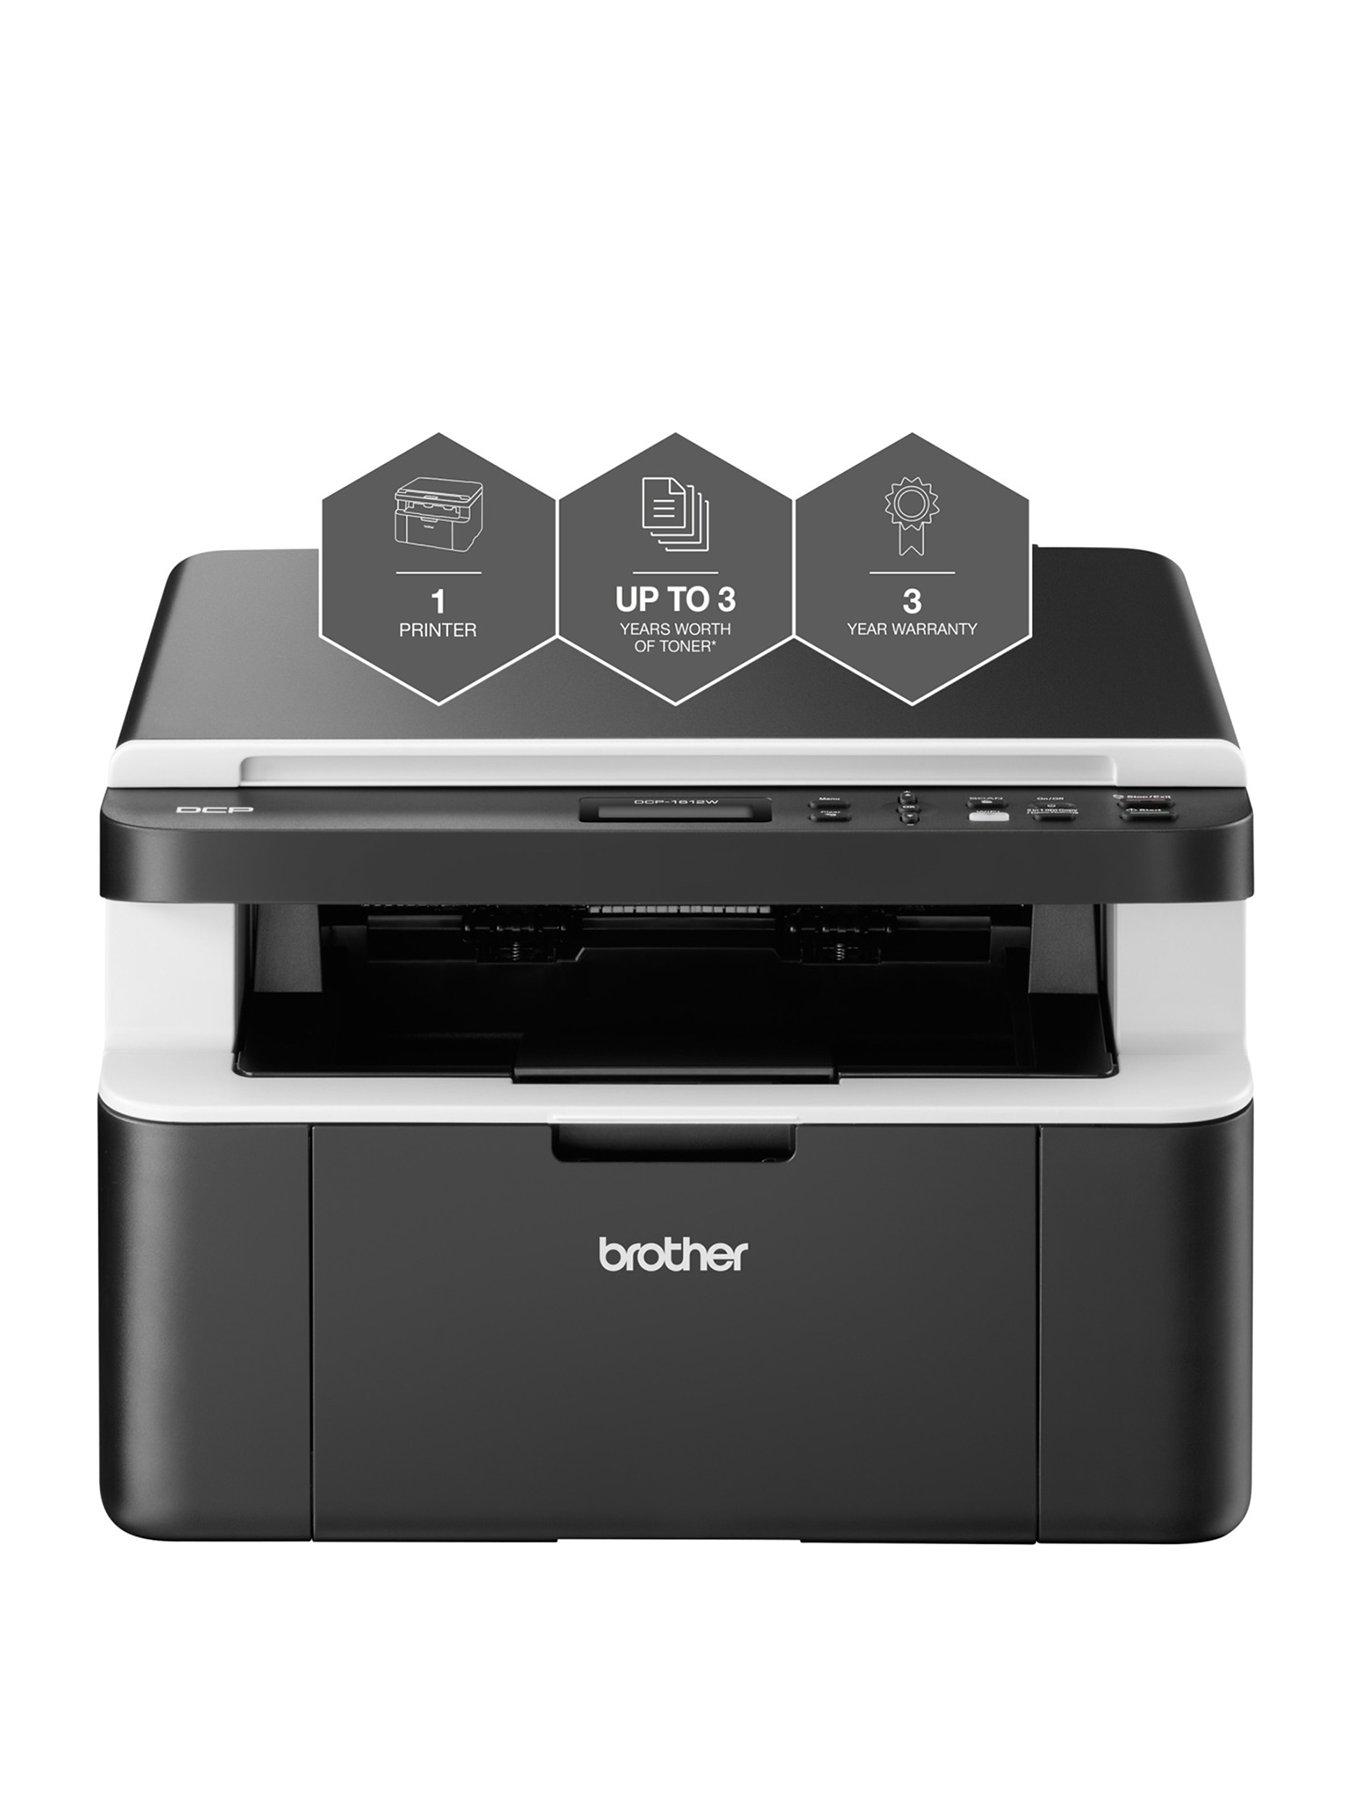 Brother DCP-1612W All in Box Bundle - Compact, Wireless, Mono